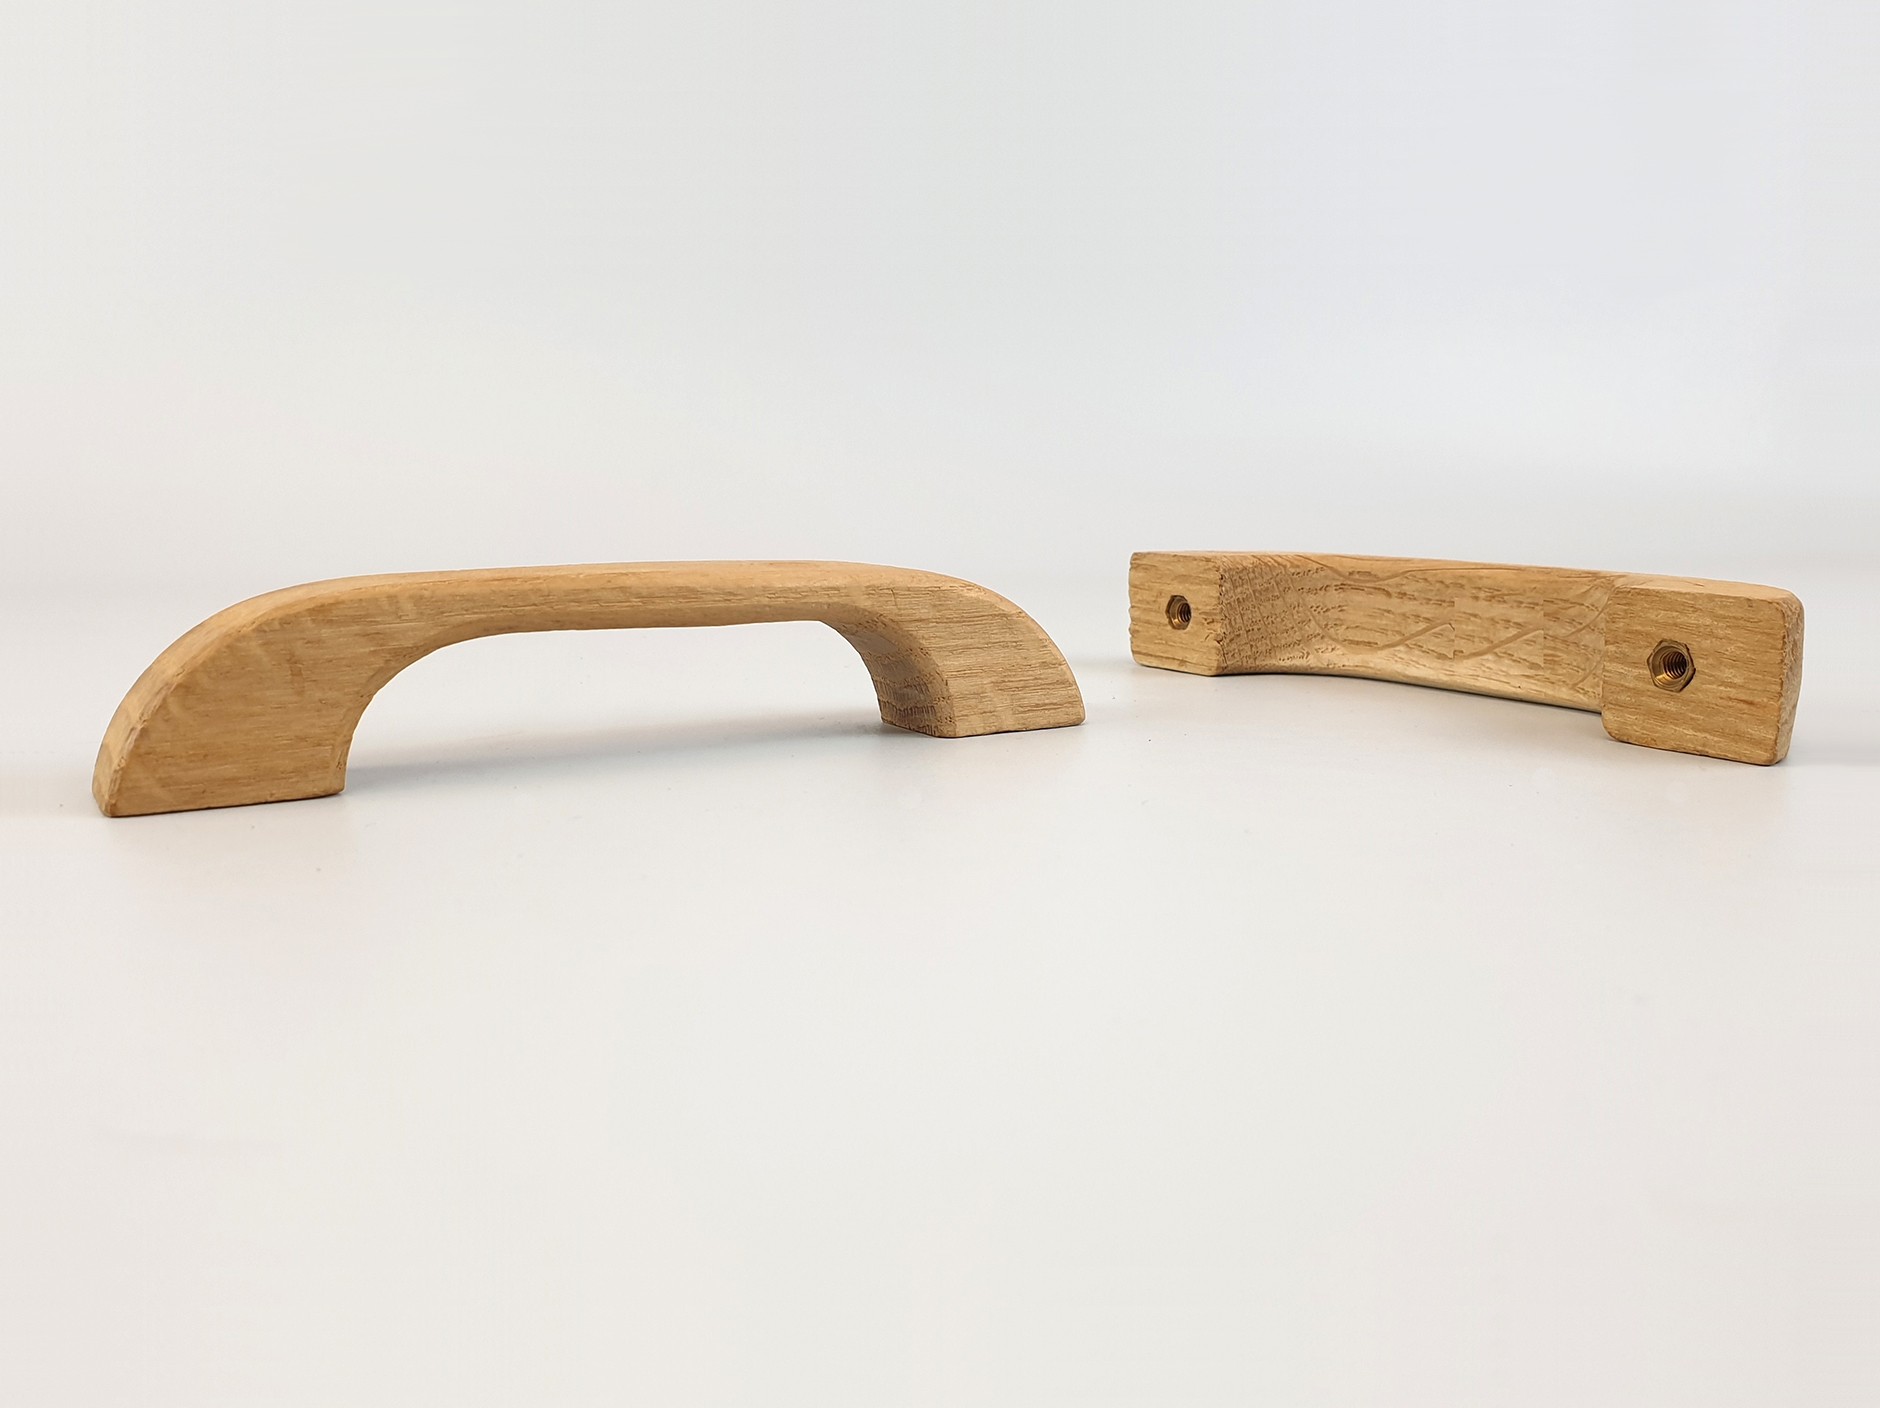 Flat oak handle handle 13 cm. with 2 nuts Ref.53